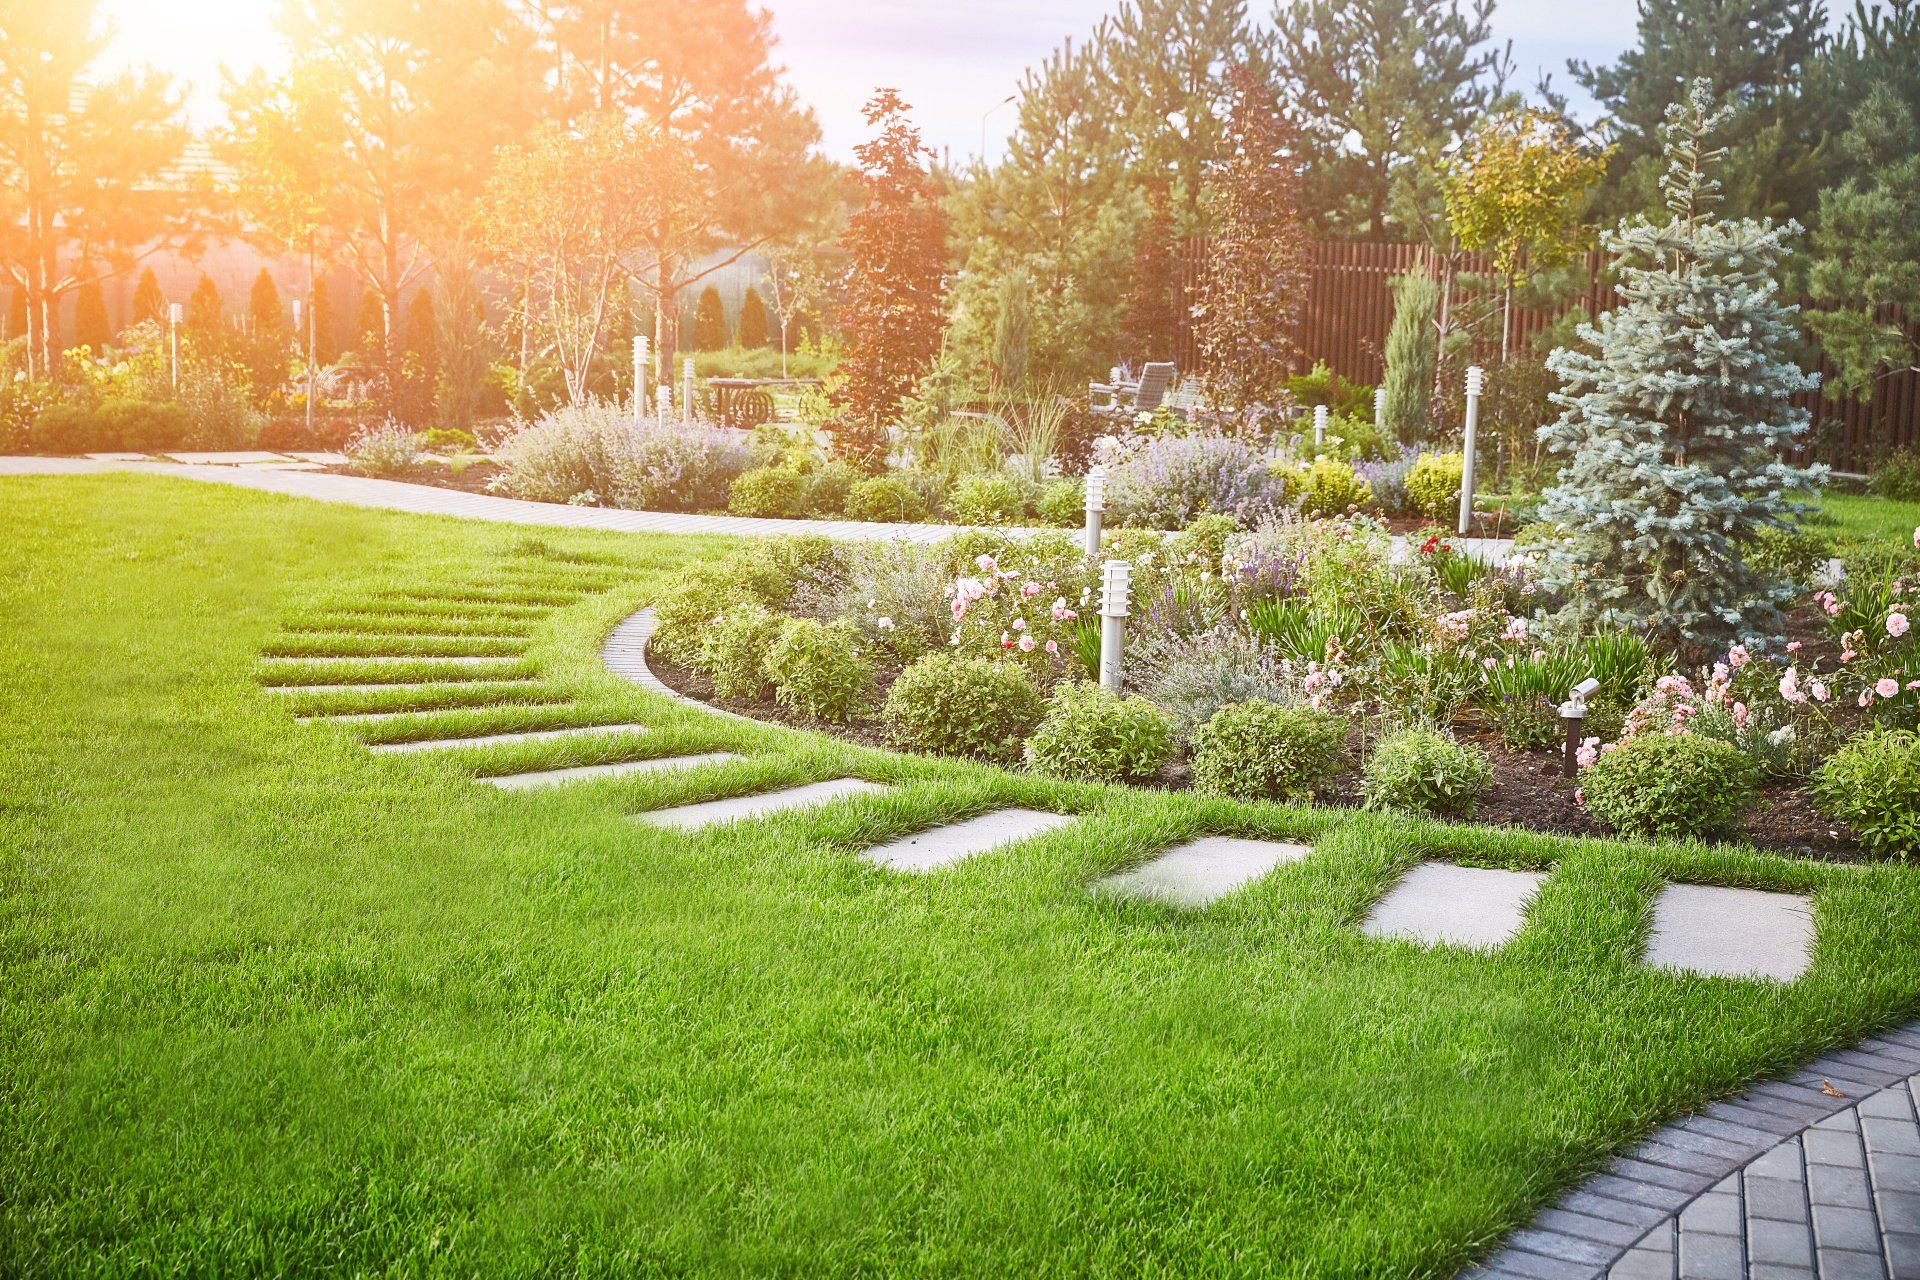 Baton Rouge Landscaping and Mowing Services: Helping HOAs